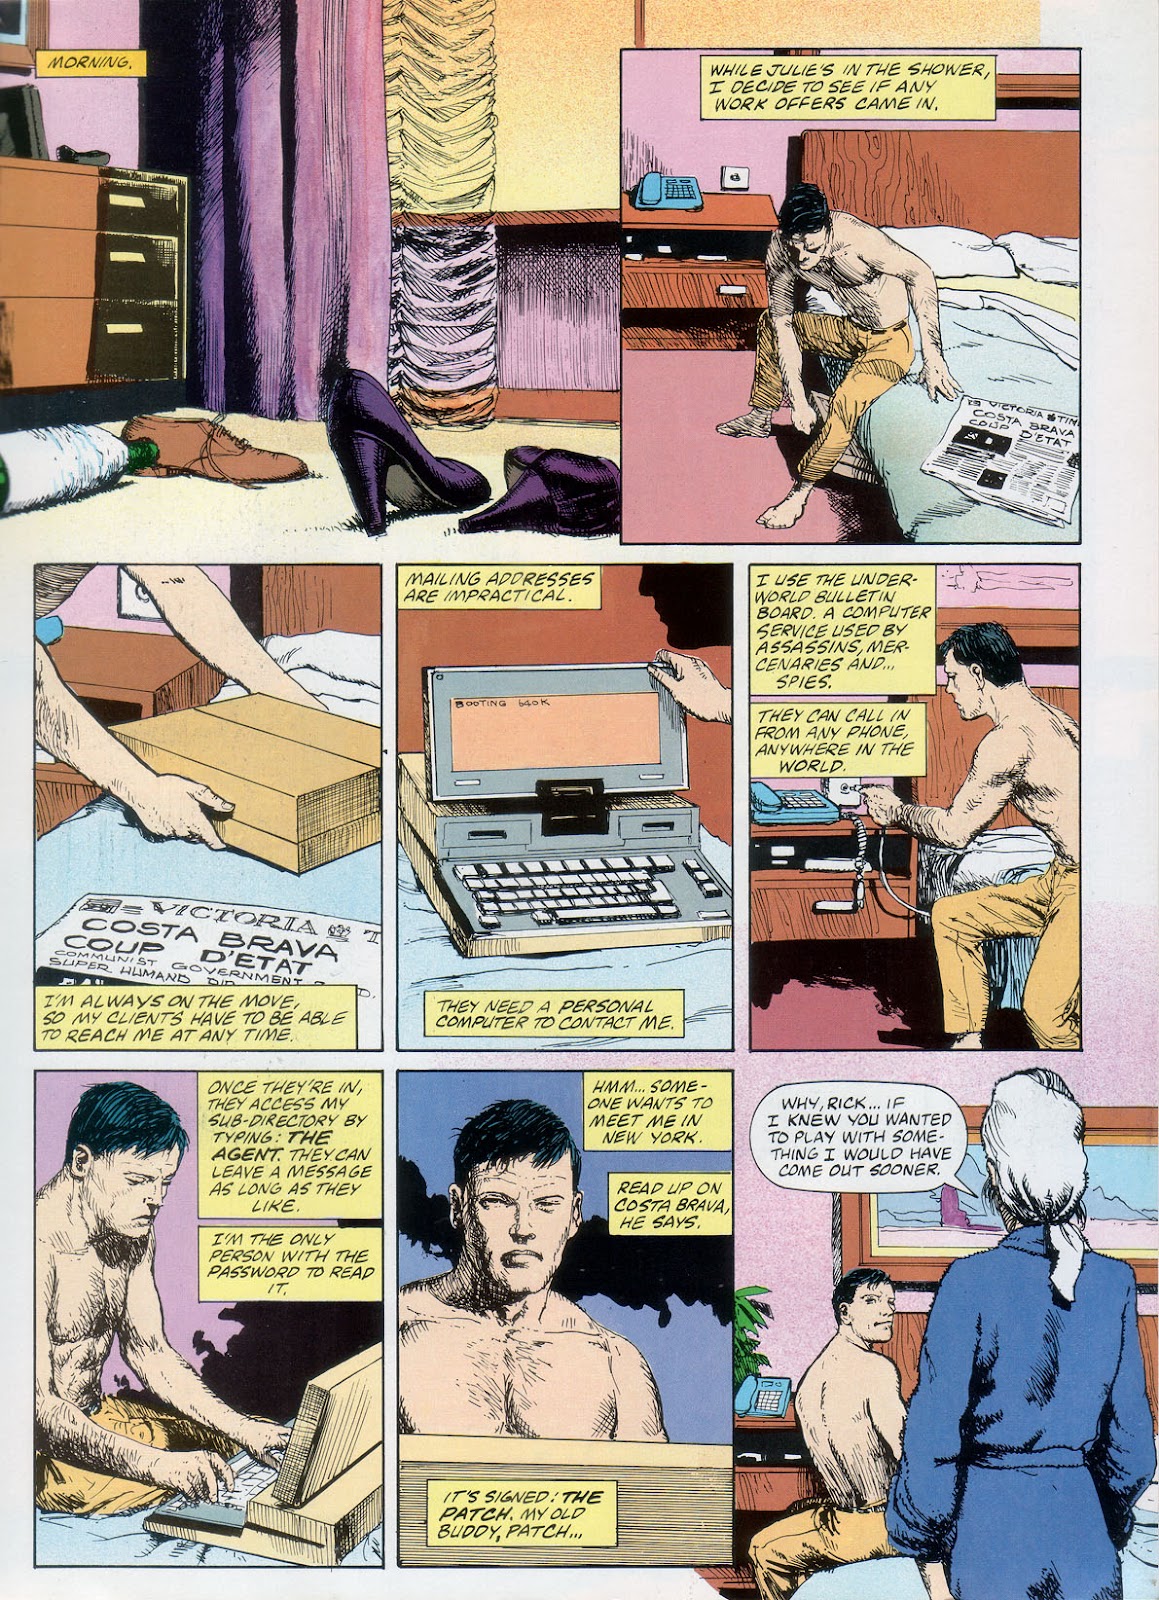 Marvel Graphic Novel issue 57 - Rick Mason - The Agent - Page 19